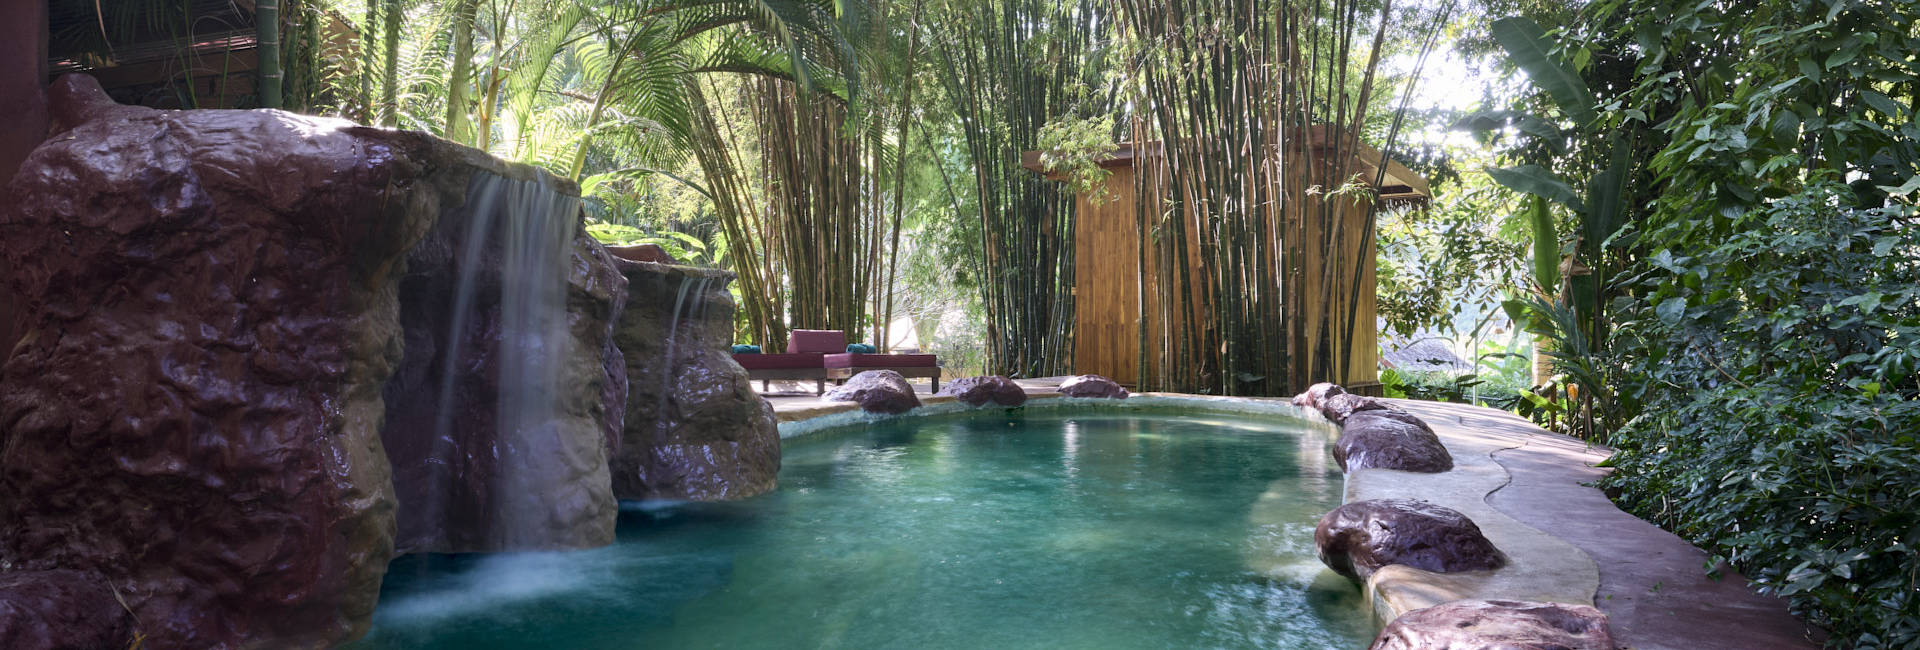 In the beautiful town of Luang Prabang, a pool nestled amidst lush trees is enhanced by a mesmerizing waterfall.